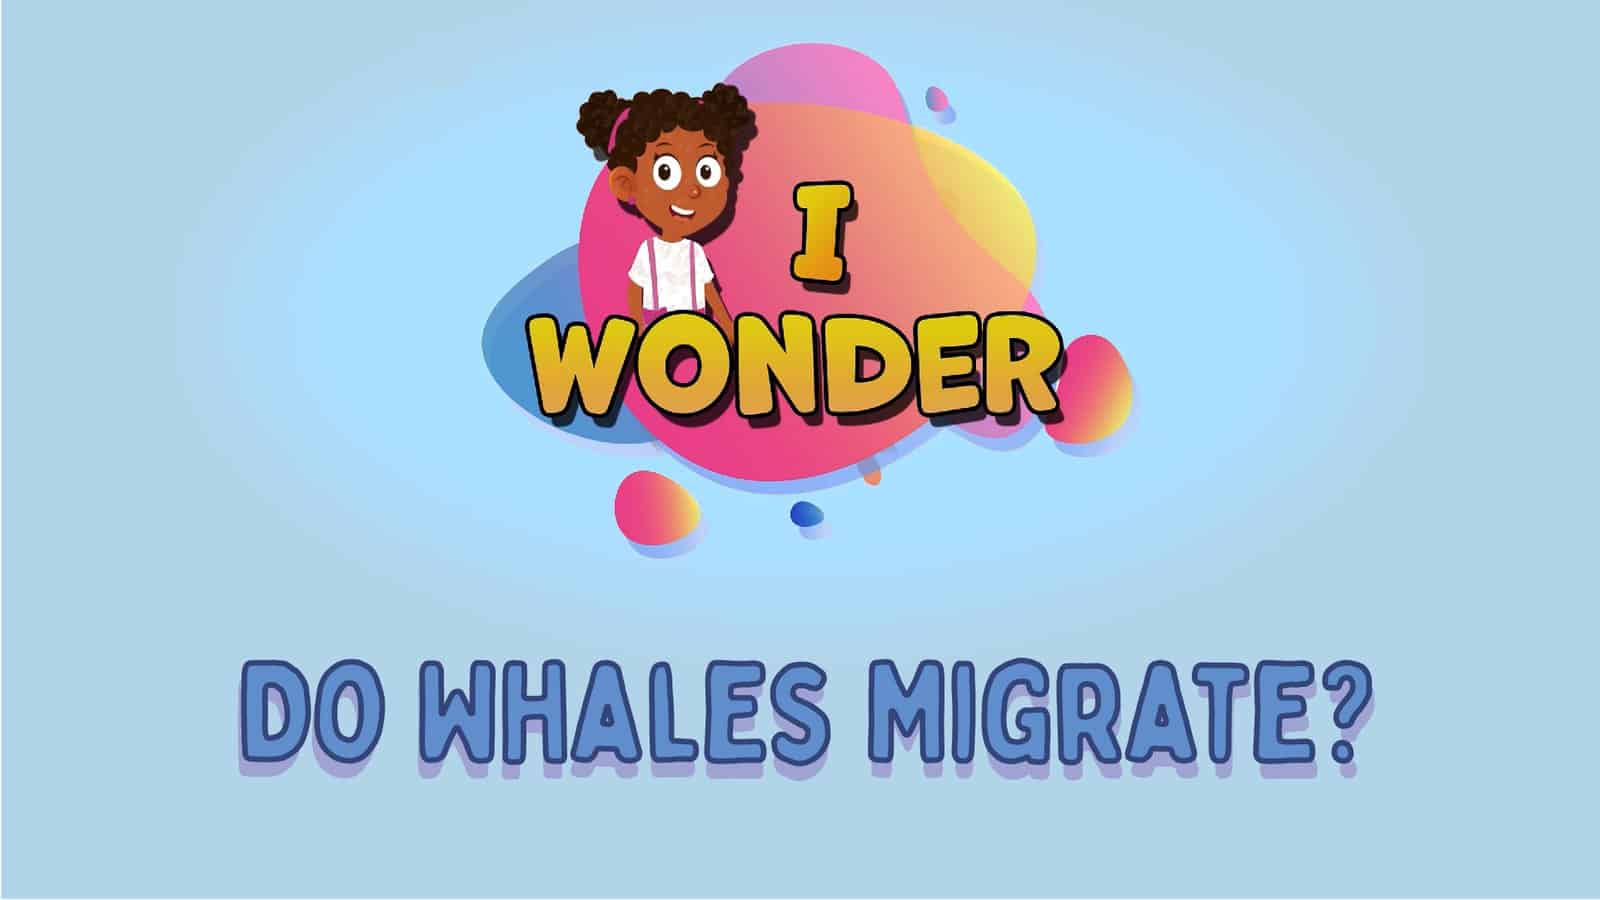 Do Whales Migrate?